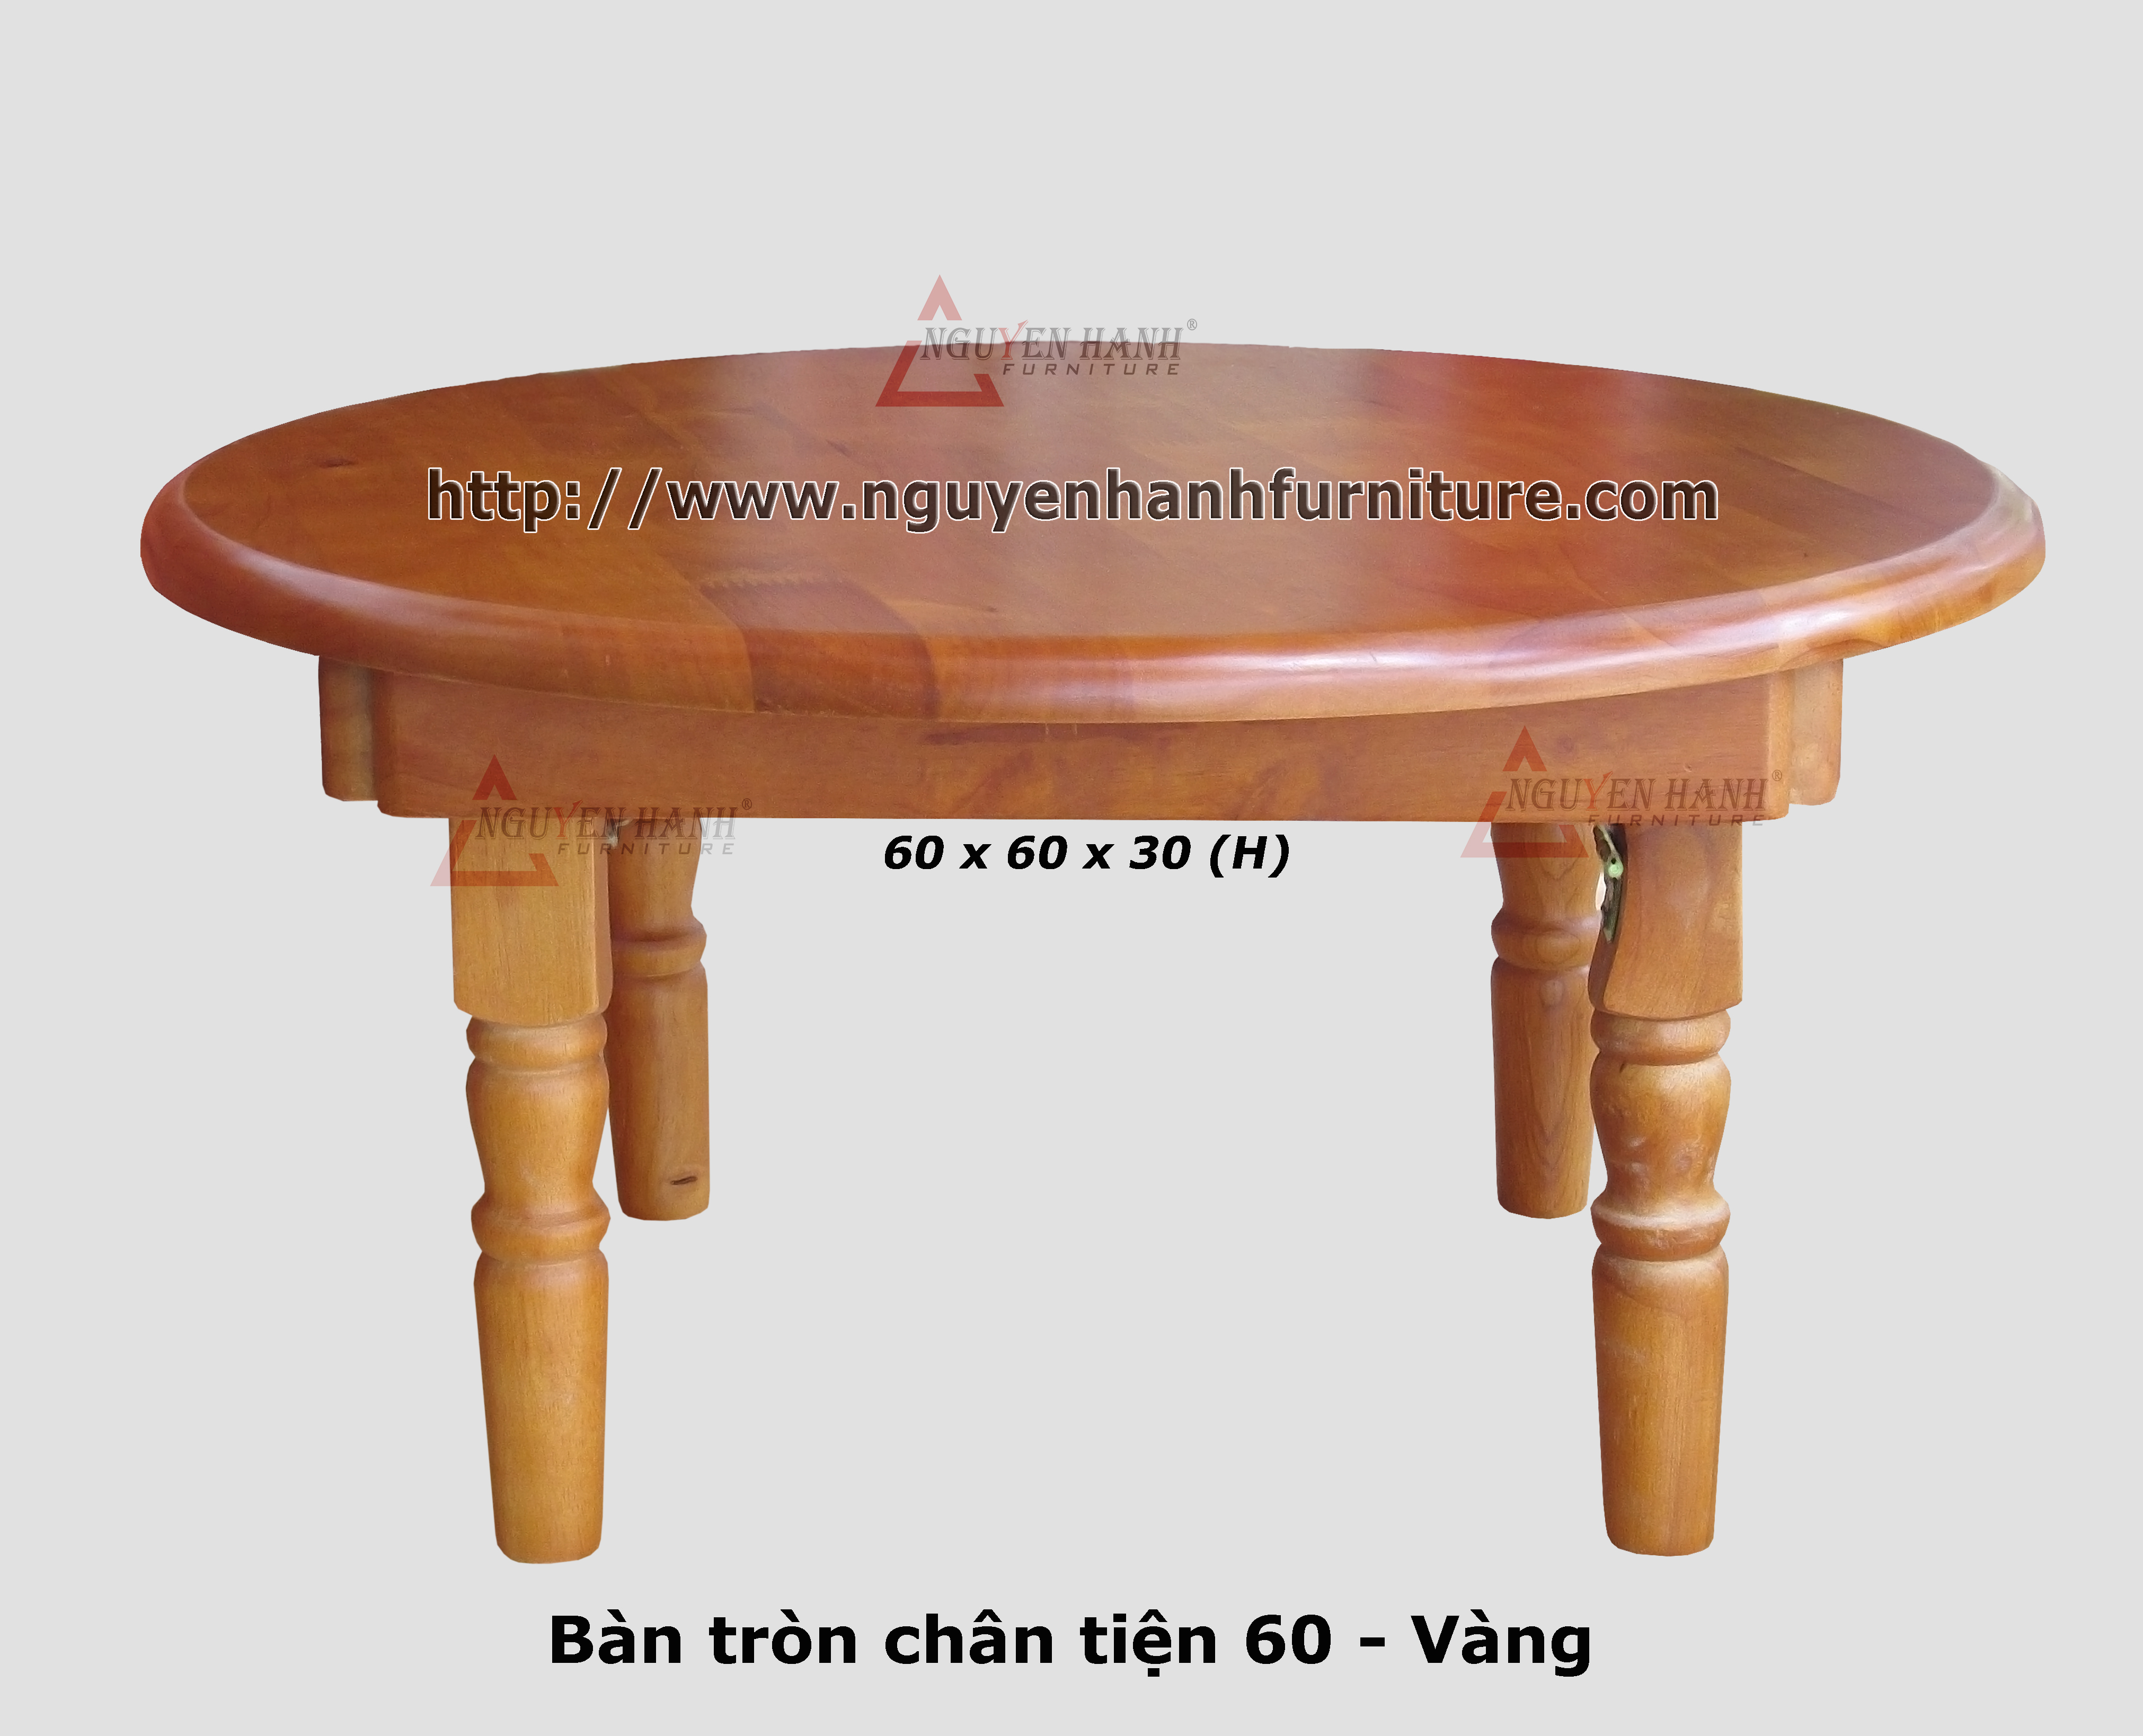 Name product: Round table with turnery legs (Yellow) - Dimensions: 60 x 60 x 30 (H) - Description: Wood natural rubber 